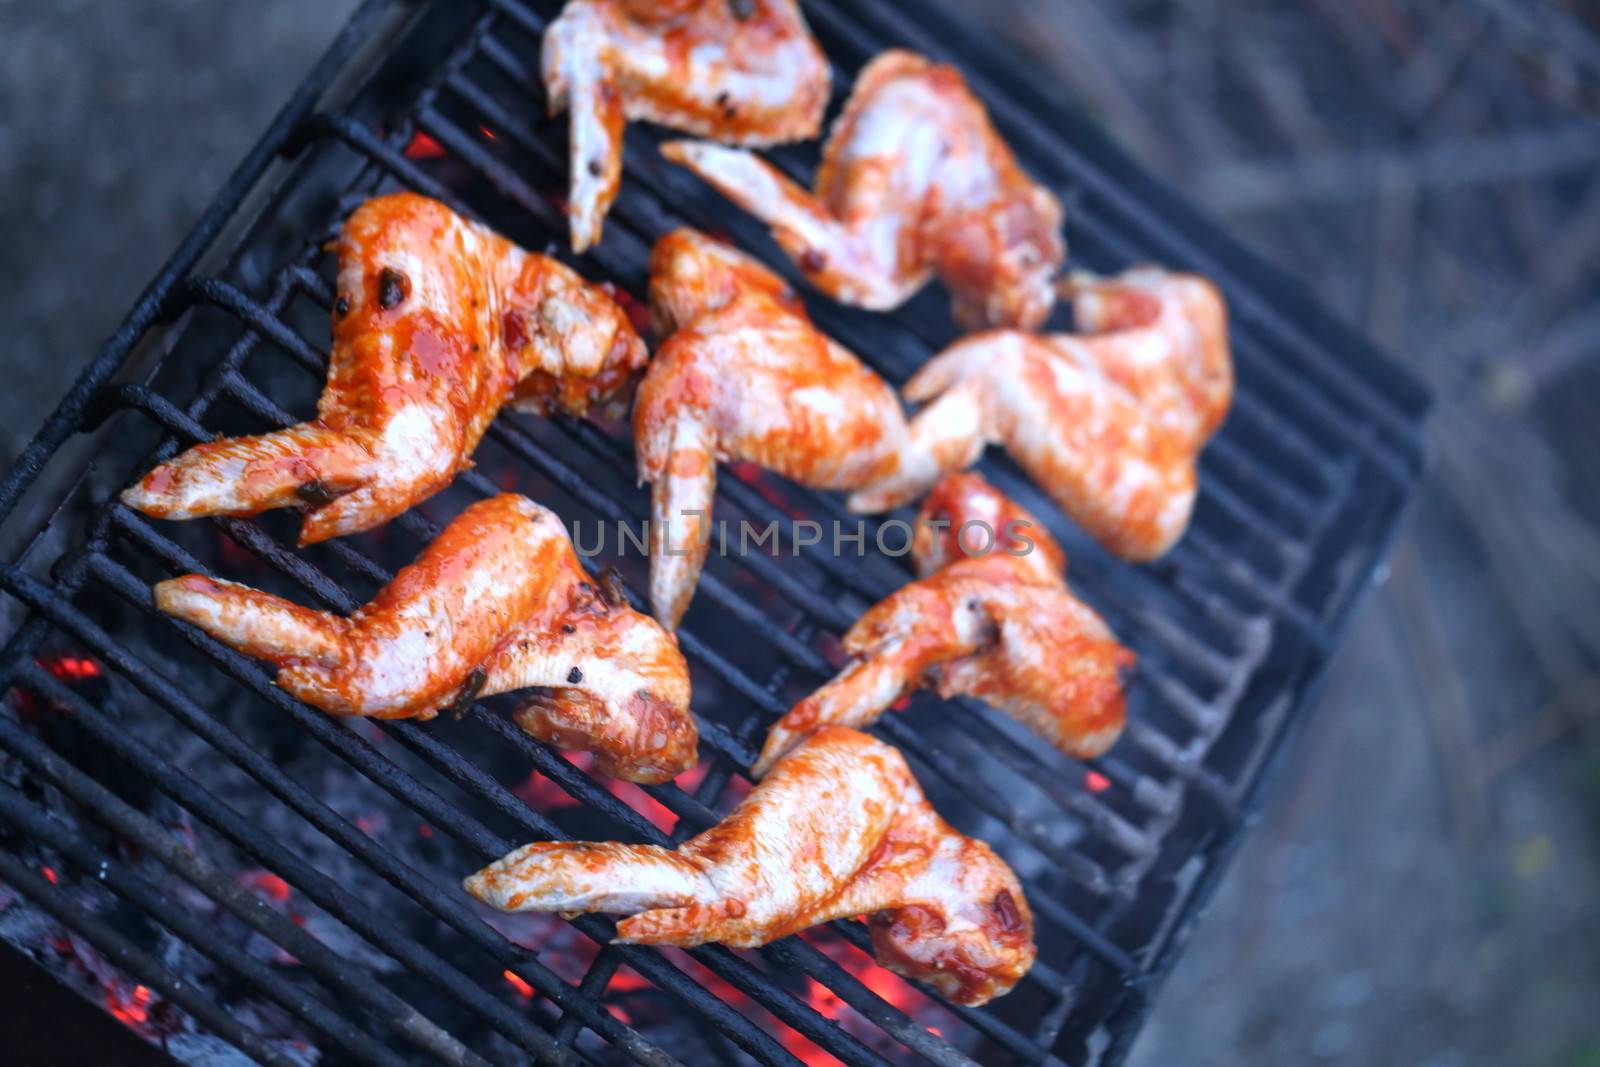  chicken wings being cooked on an outdoor barbeque